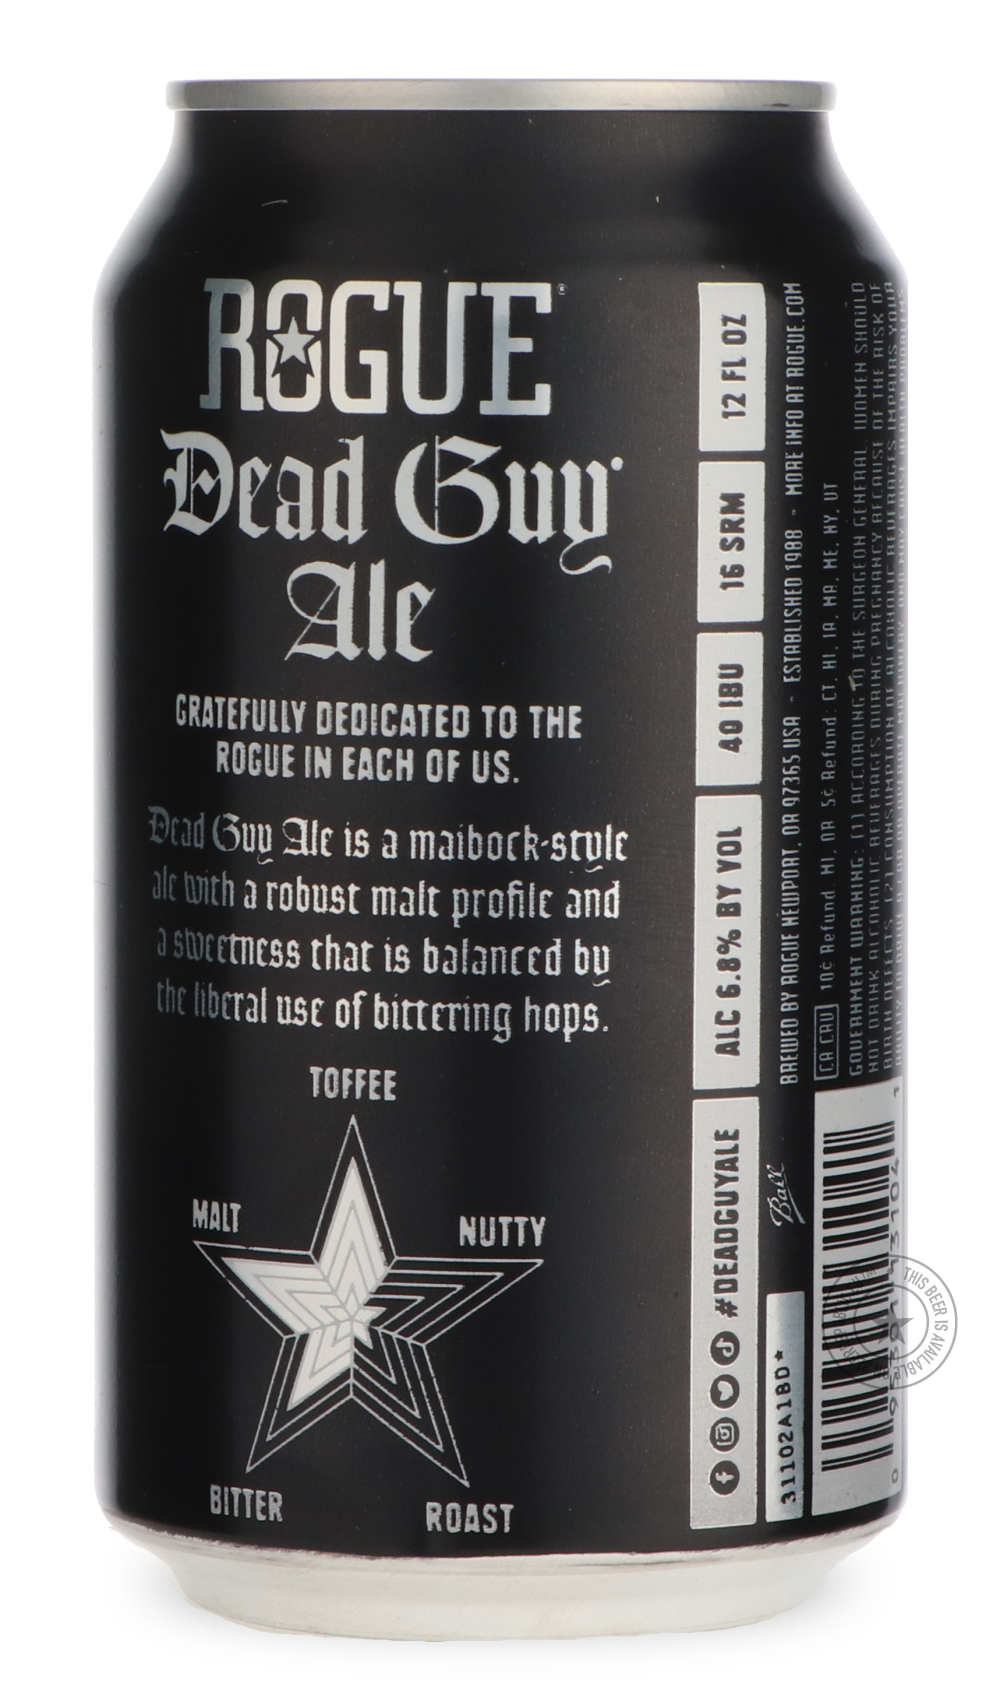 -Rogue- Dead Guy Ale-Pale- Only @ Beer Republic - The best online beer store for American & Canadian craft beer - Buy beer online from the USA and Canada - Bier online kopen - Amerikaans bier kopen - Craft beer store - Craft beer kopen - Amerikanisch bier kaufen - Bier online kaufen - Acheter biere online - IPA - Stout - Porter - New England IPA - Hazy IPA - Imperial Stout - Barrel Aged - Barrel Aged Imperial Stout - Brown - Dark beer - Blond - Blonde - Pilsner - Lager - Wheat - Weizen - Amber - Barley Wine